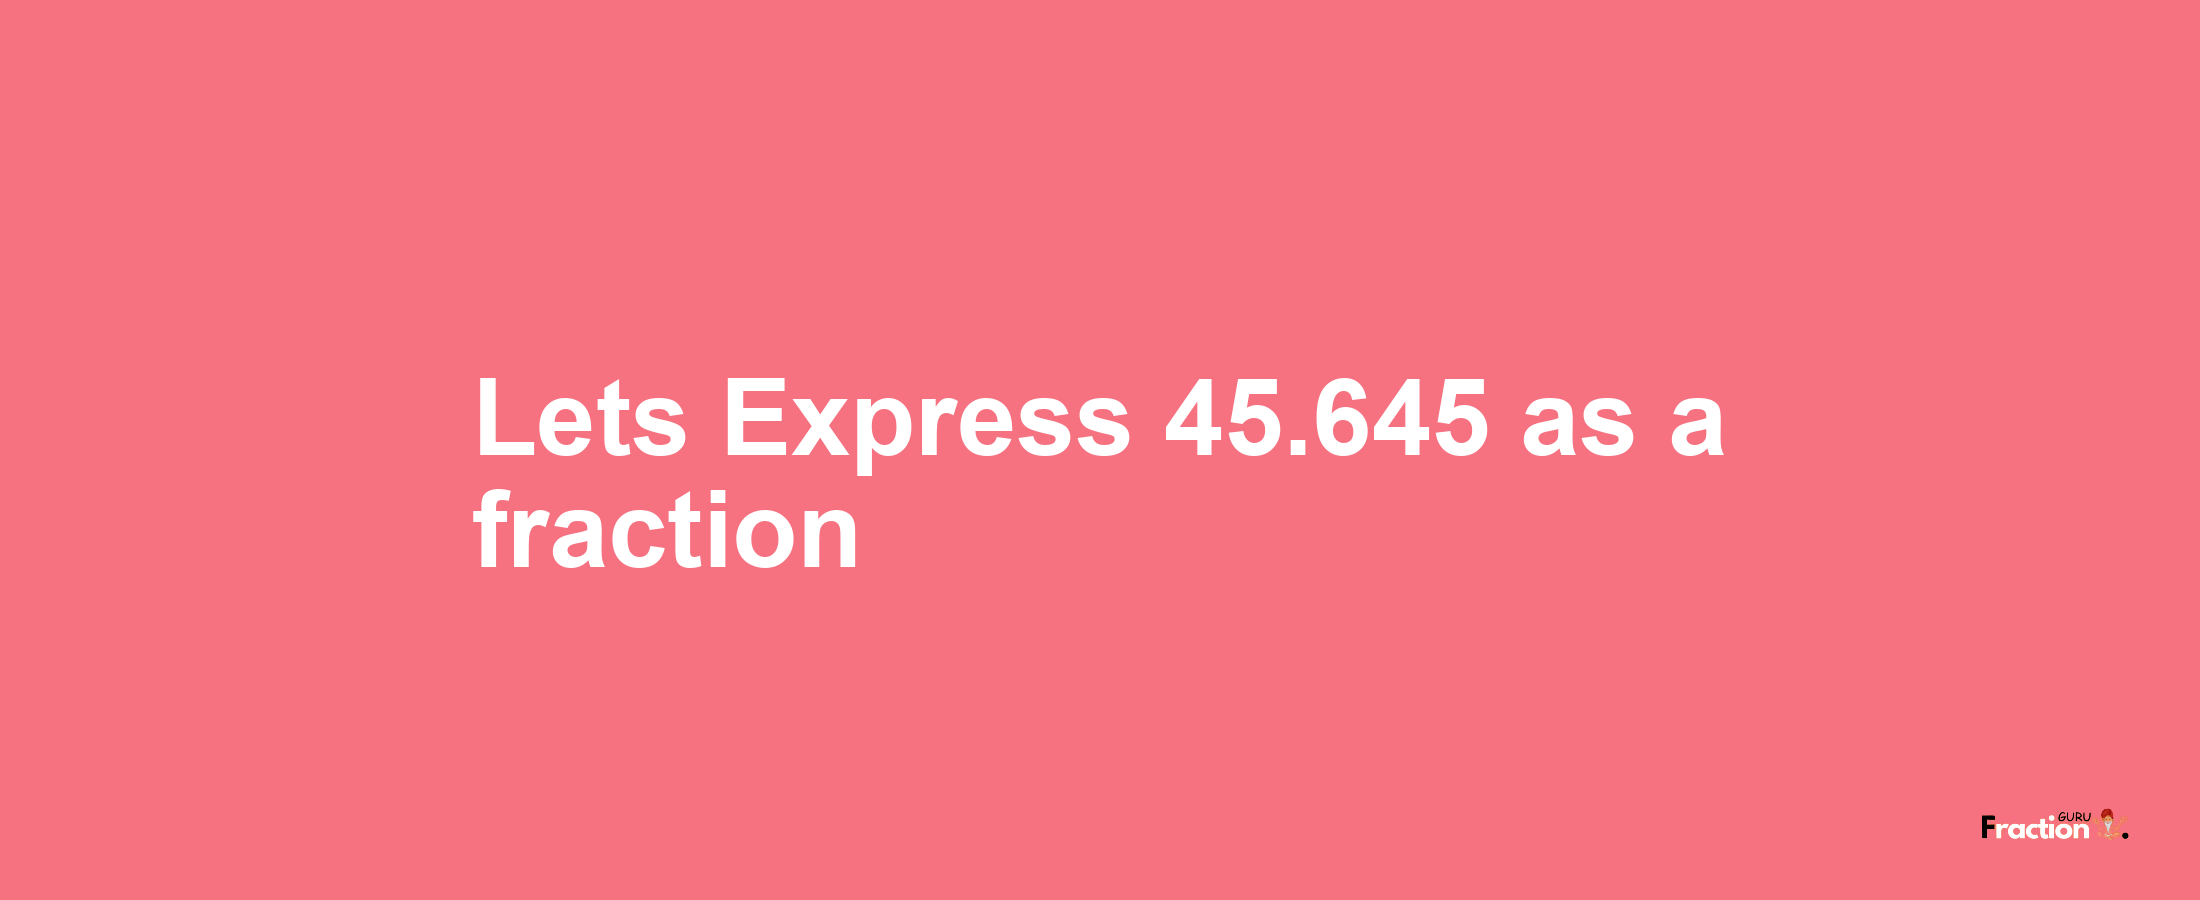 Lets Express 45.645 as afraction